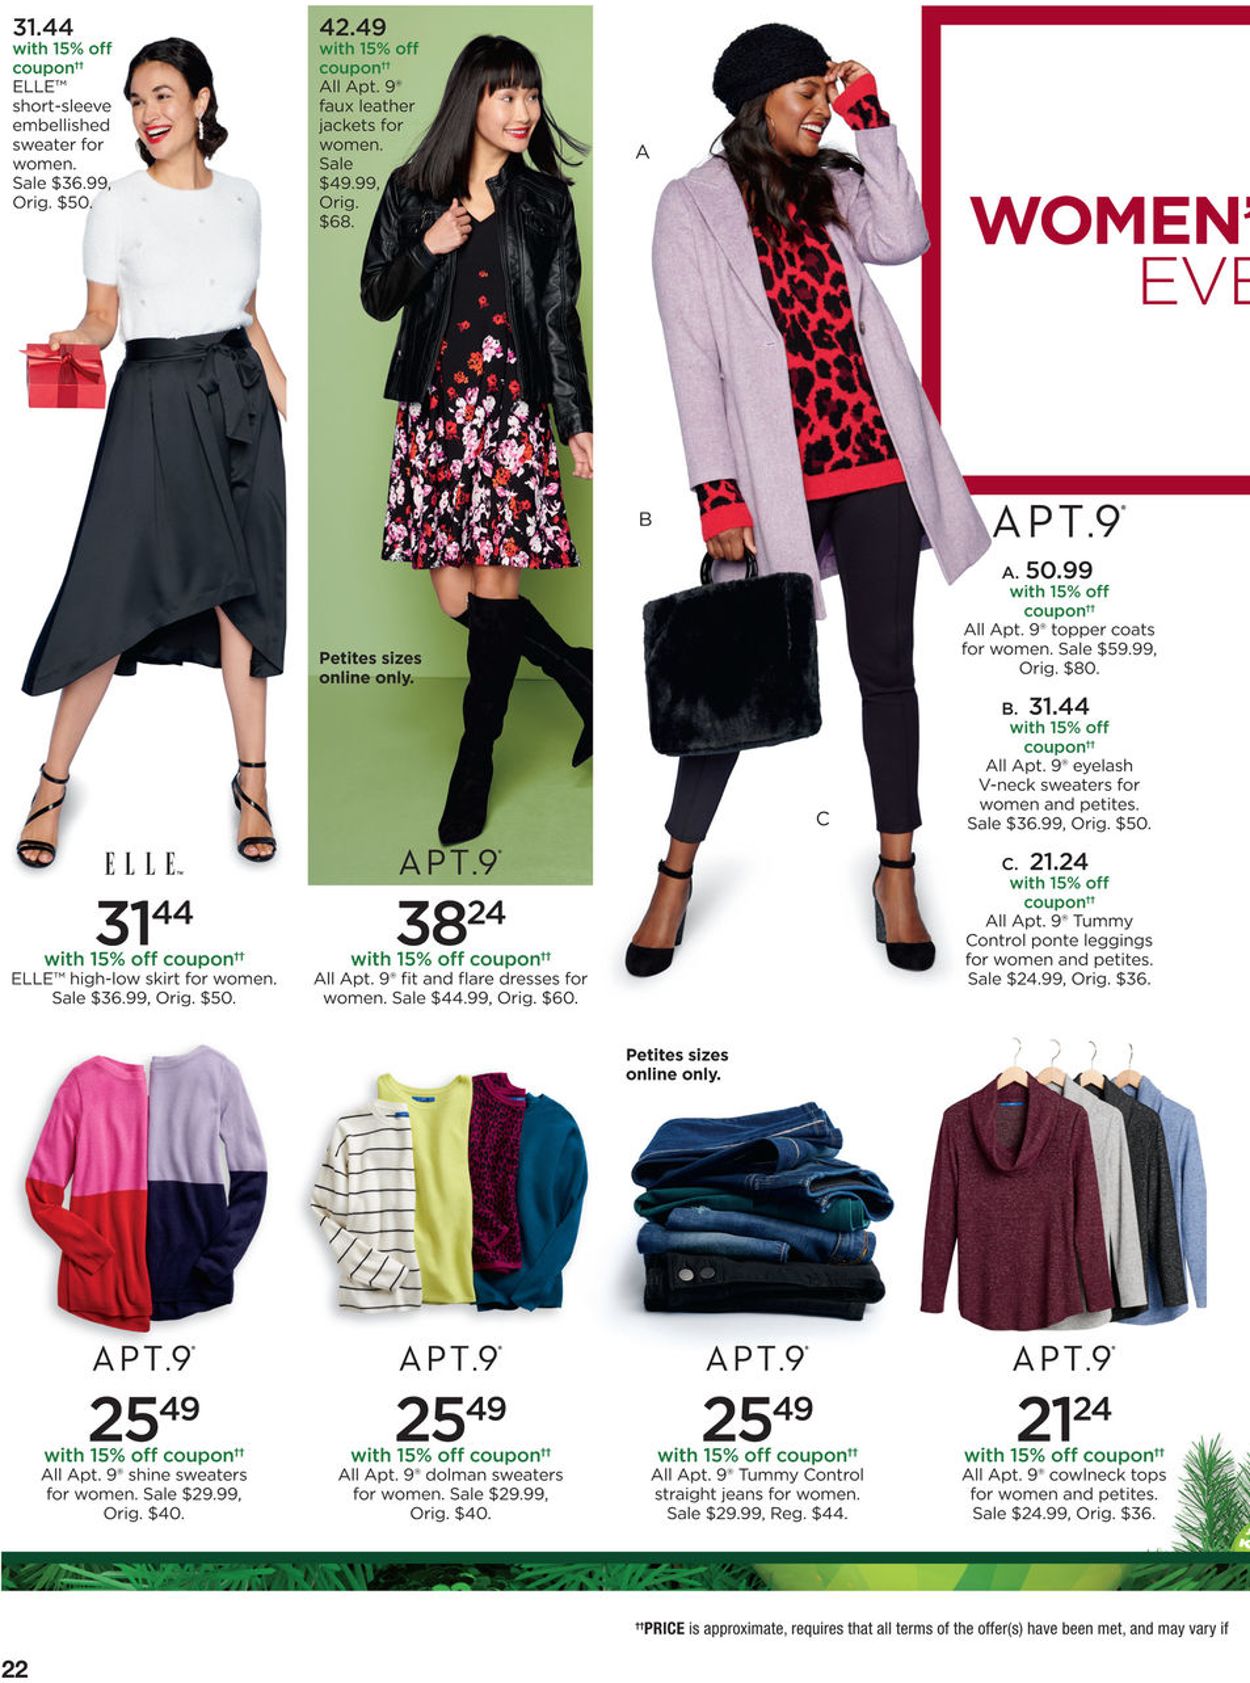 Kohl's Current weekly ad 11/07 - 11/17/2019 [22] - frequent-ads.com